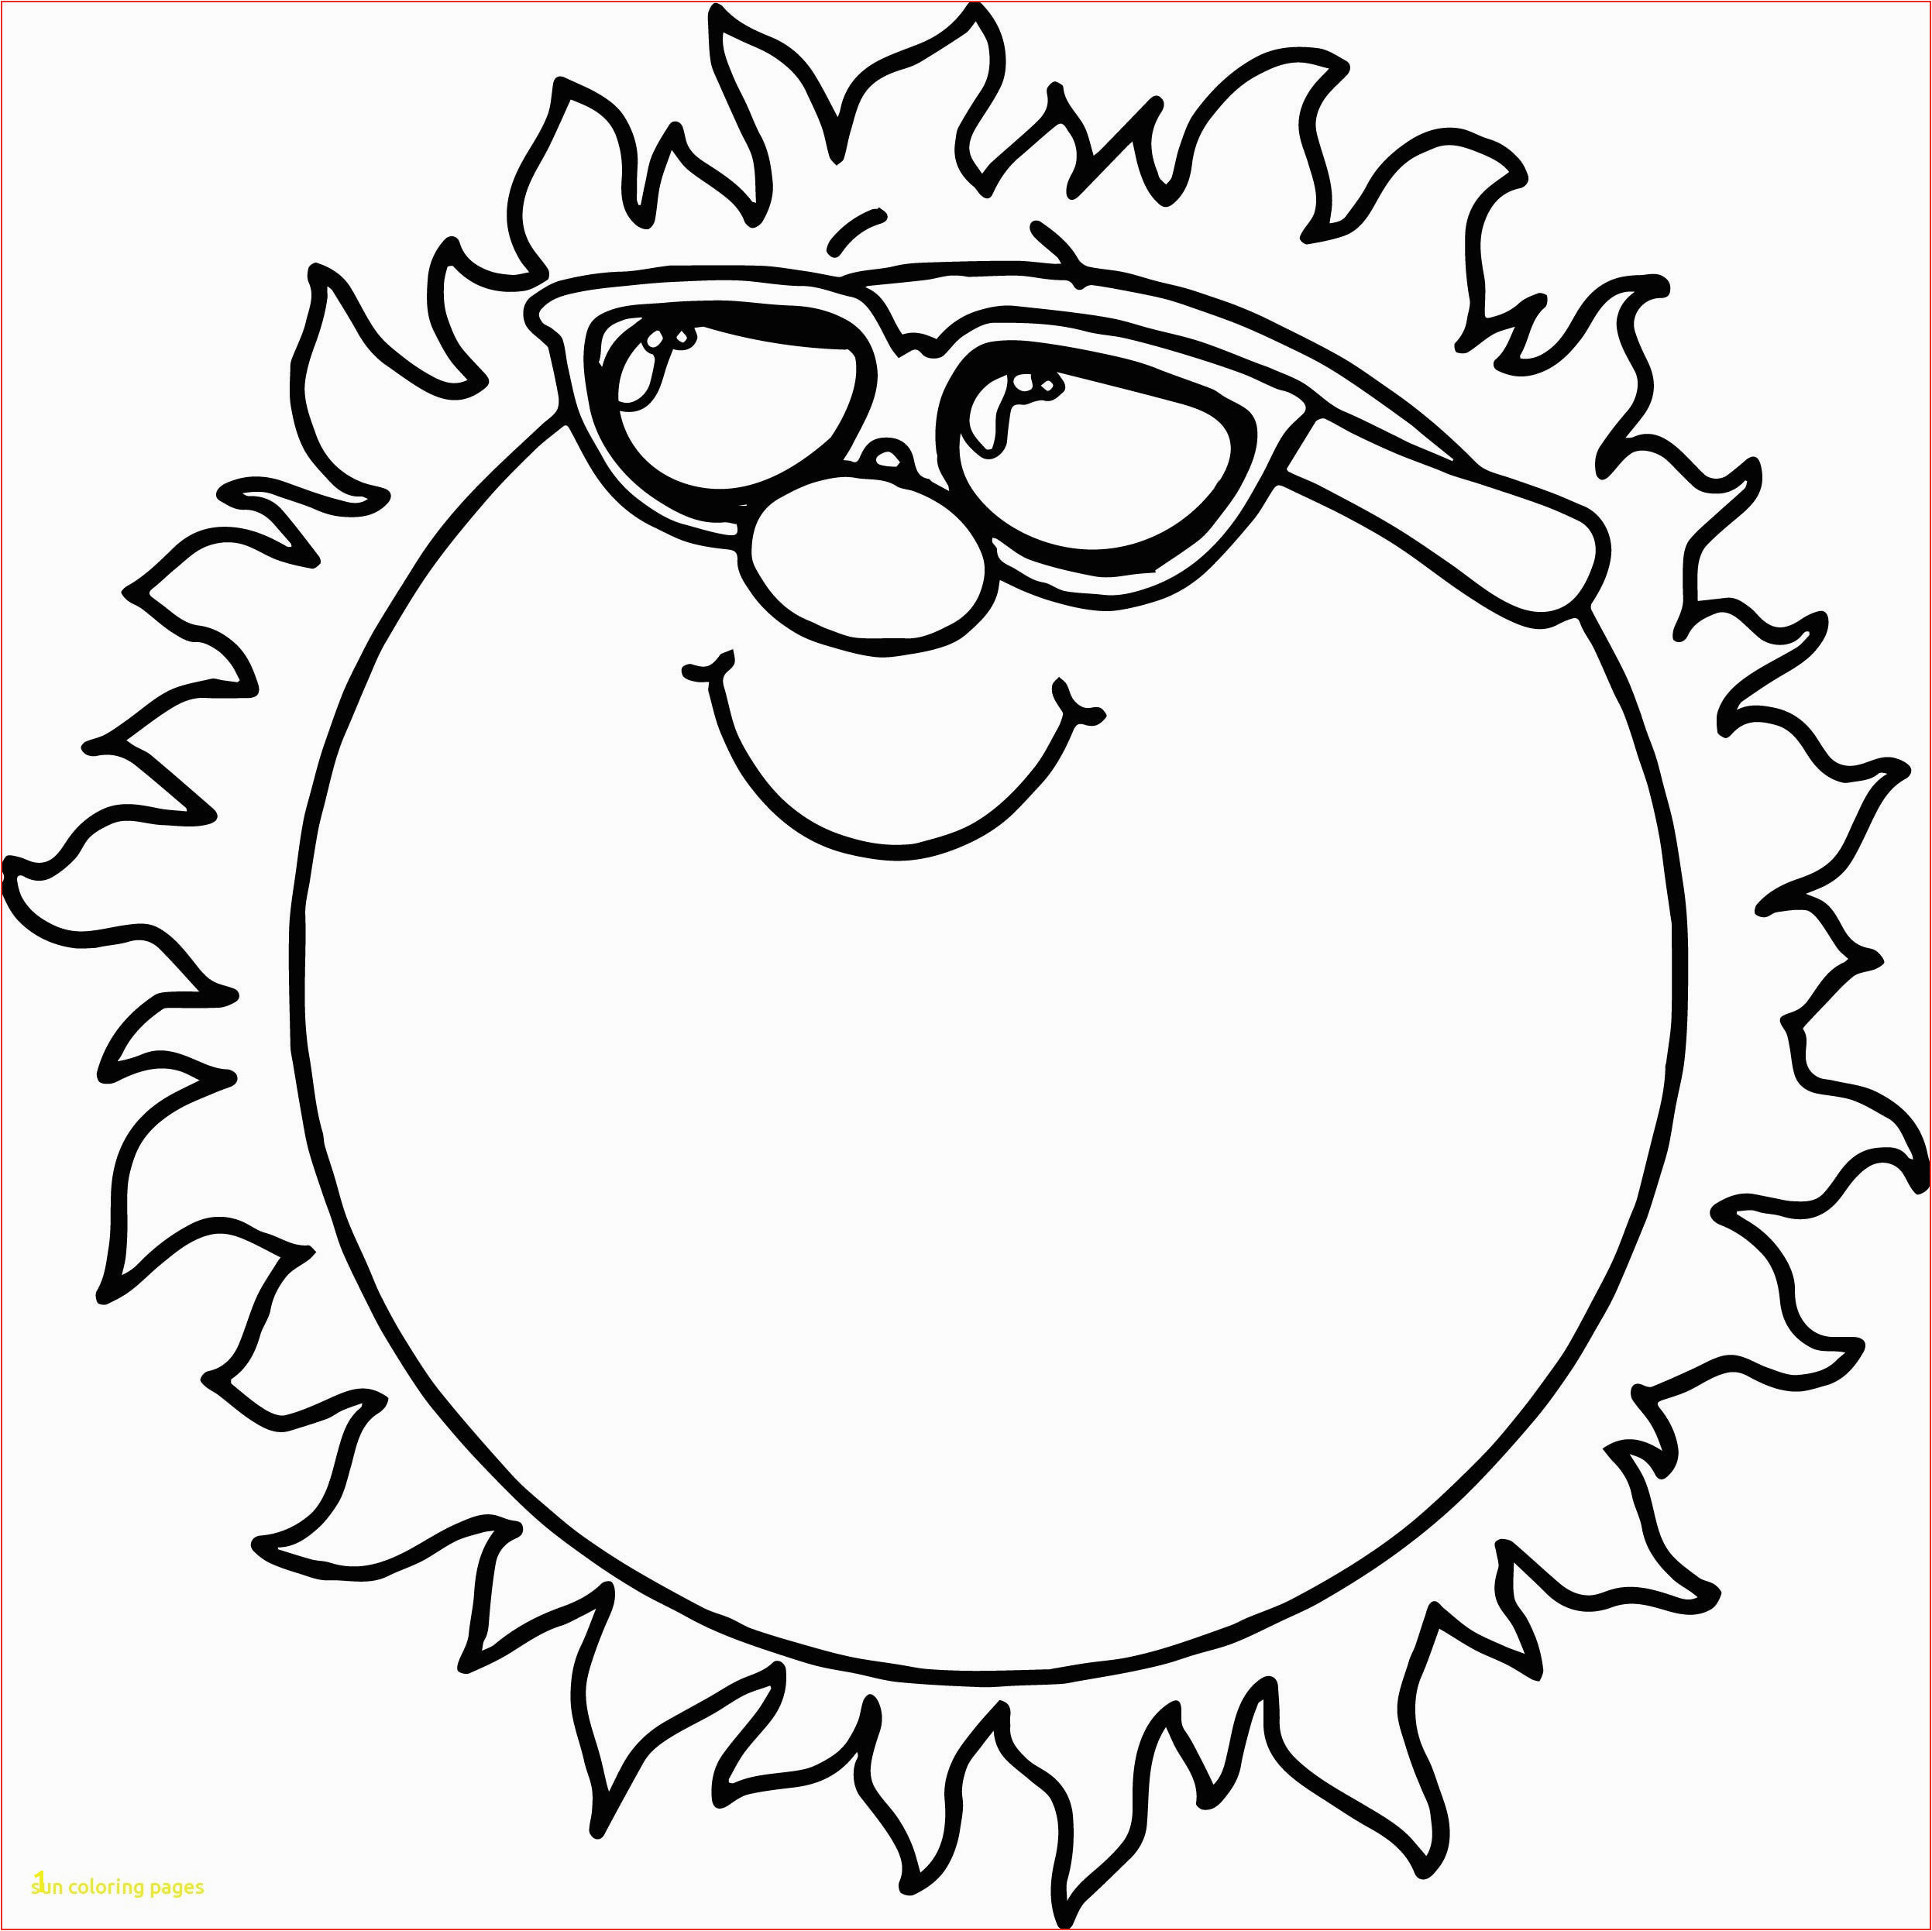 Kid drawings drawing for kids new printable sun colouring for preschoolers of kid drawings 2494x2493